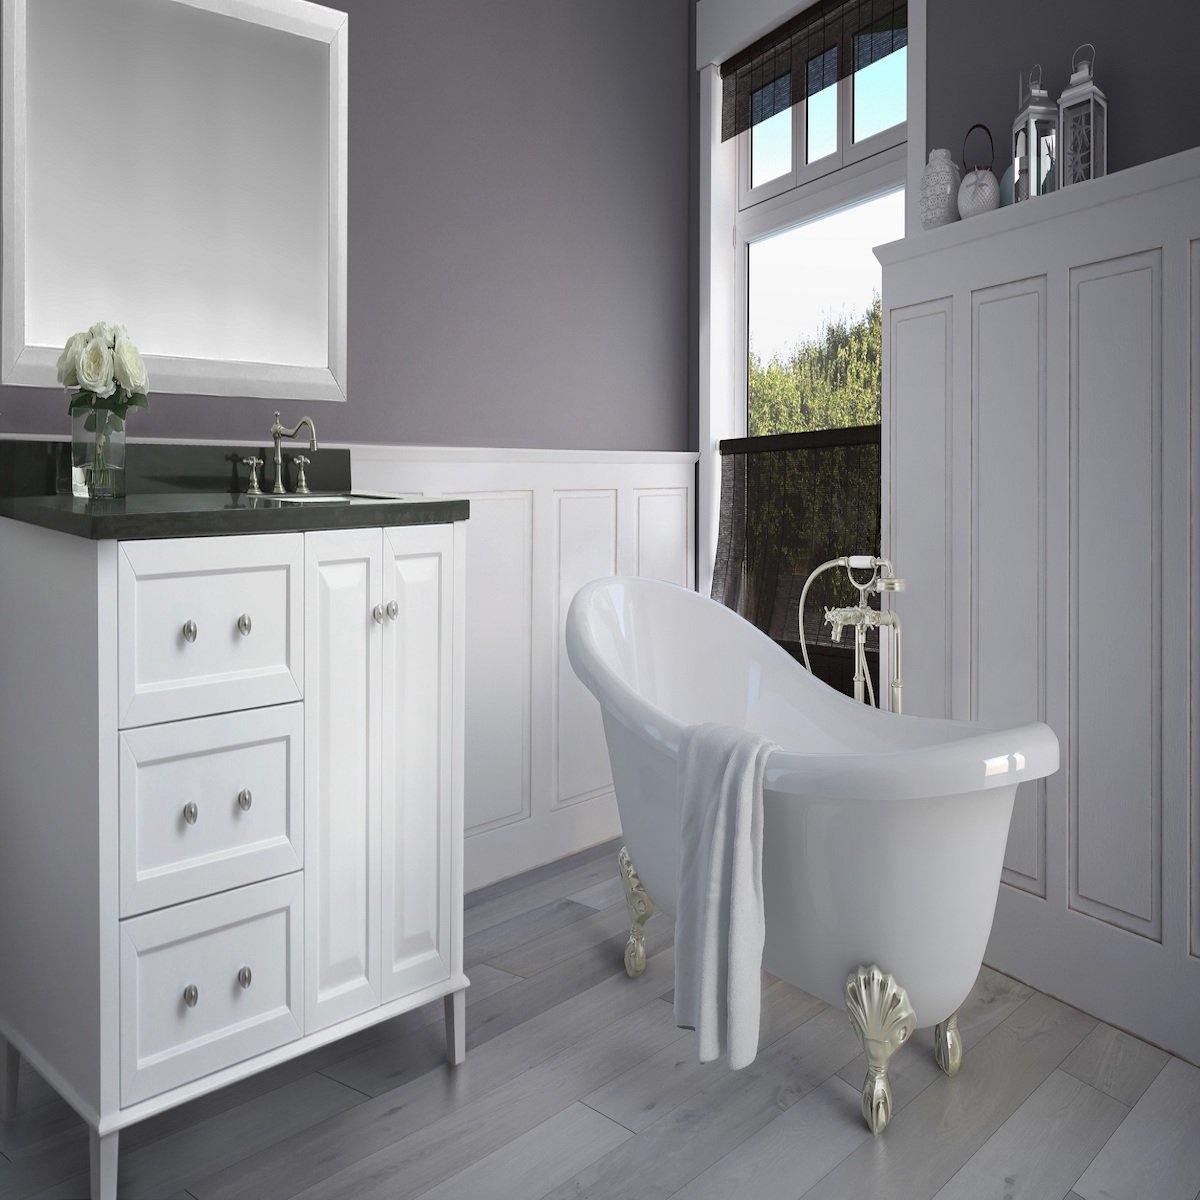 Ancerre Designs Hannah 48 Inch White Single Vanity with Right Basin and Nickel Hardware in Bathroom